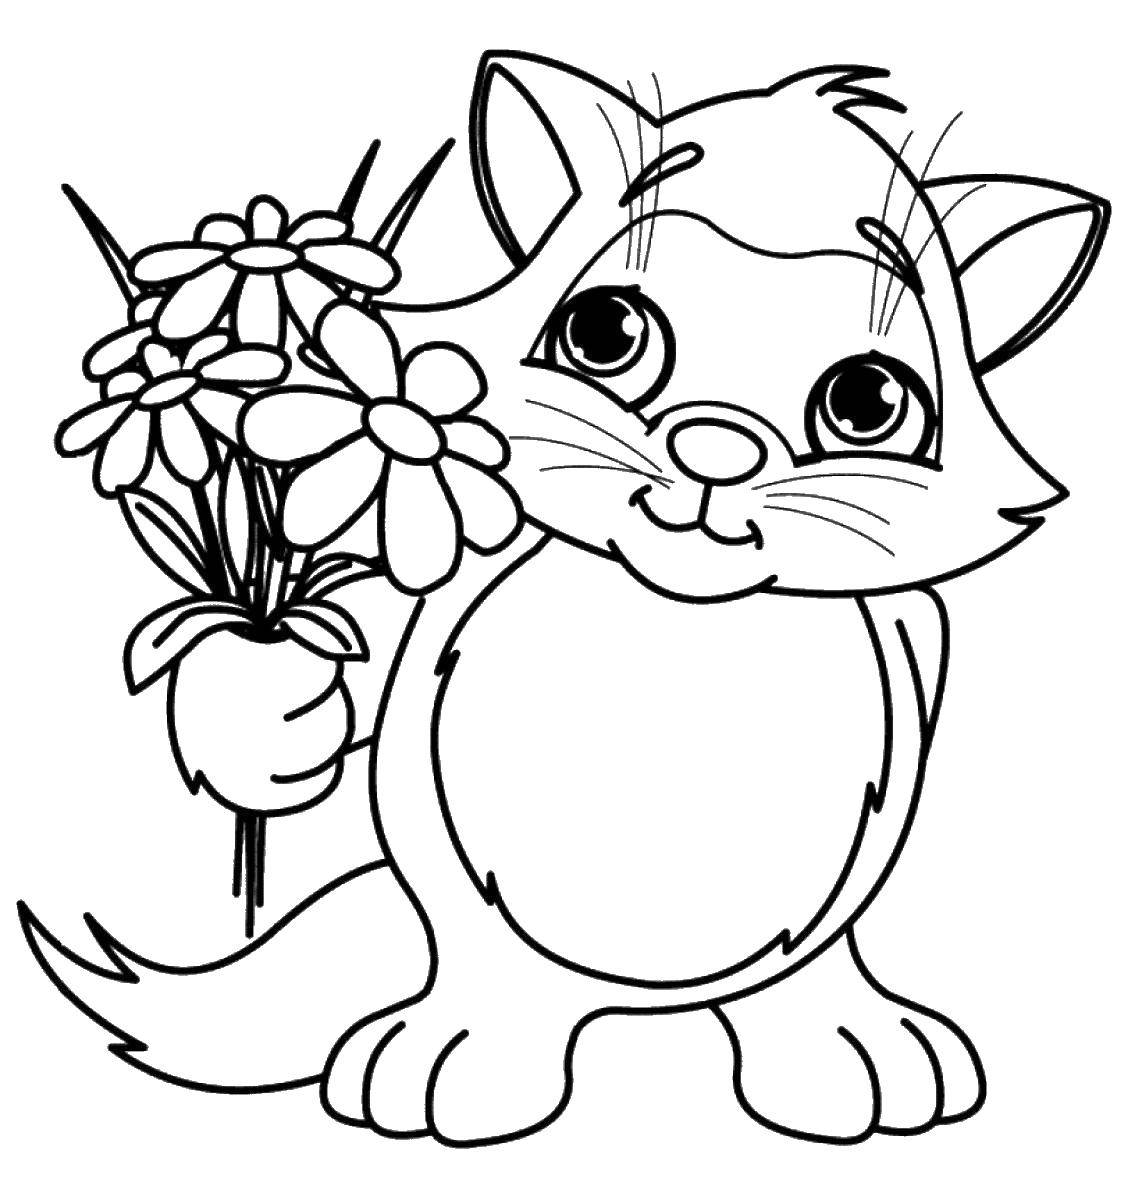 Coloring A cat with a bouquet. Category Cats and kittens. Tags:  animals, kitten, flowers.